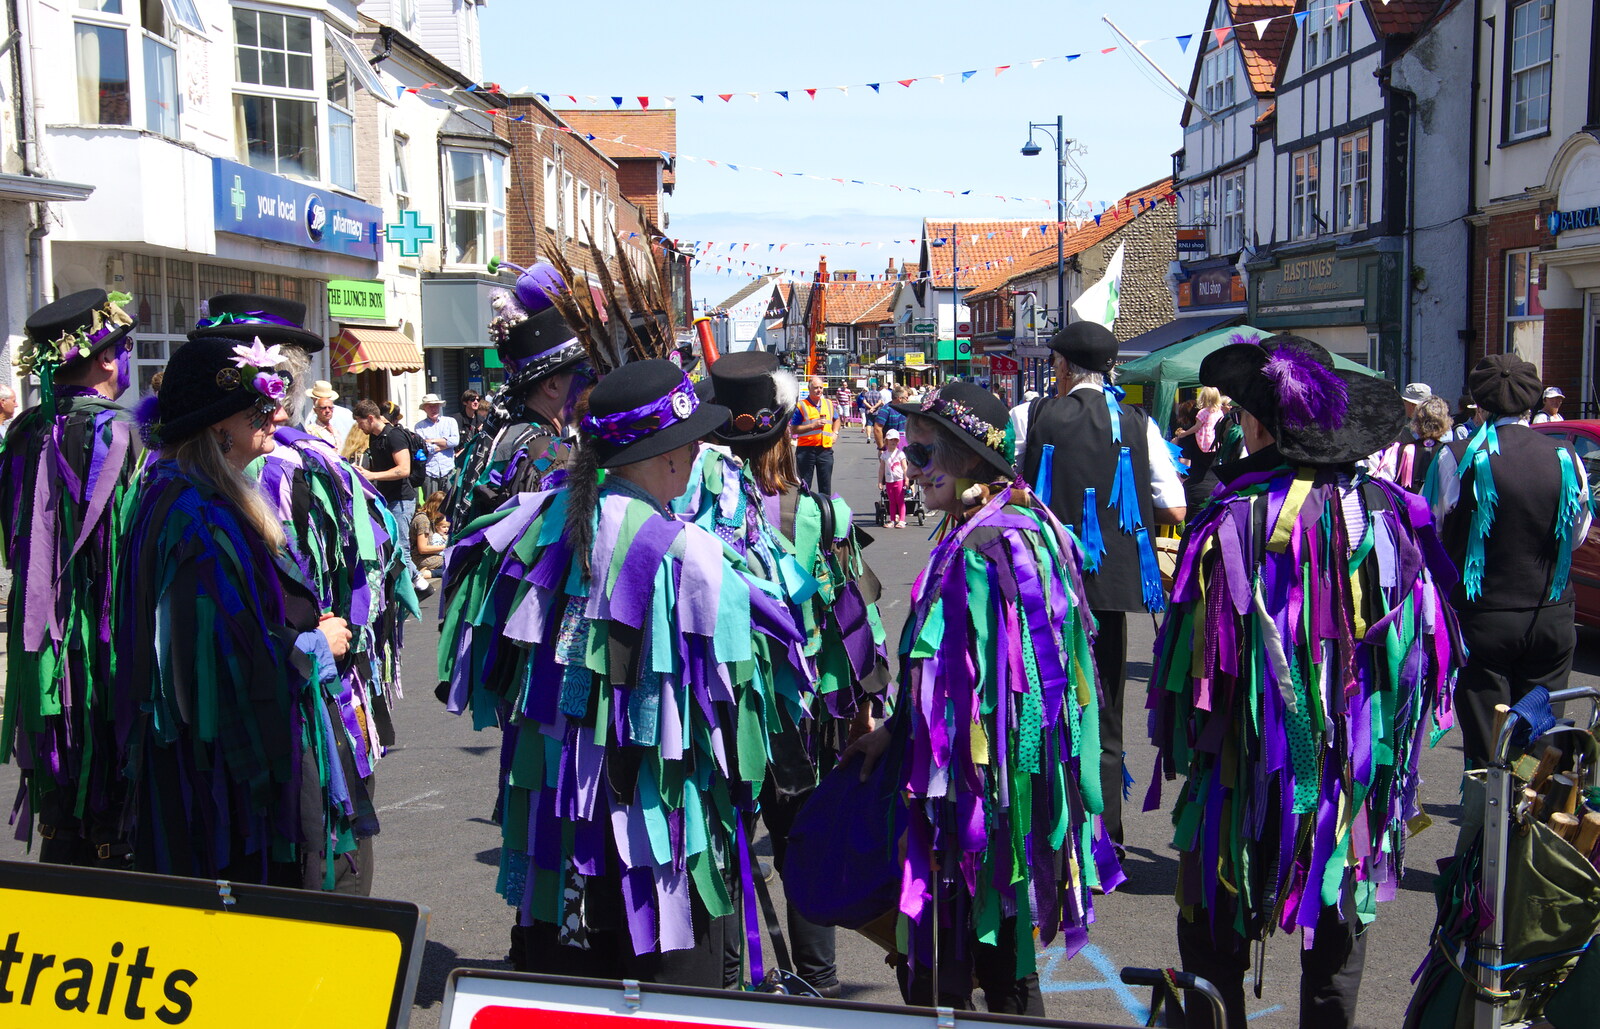 There's more purple Morris going on from Kelling Camping and the Potty Morris Festival, Sheringham, North Norfolk - 6th July 2019